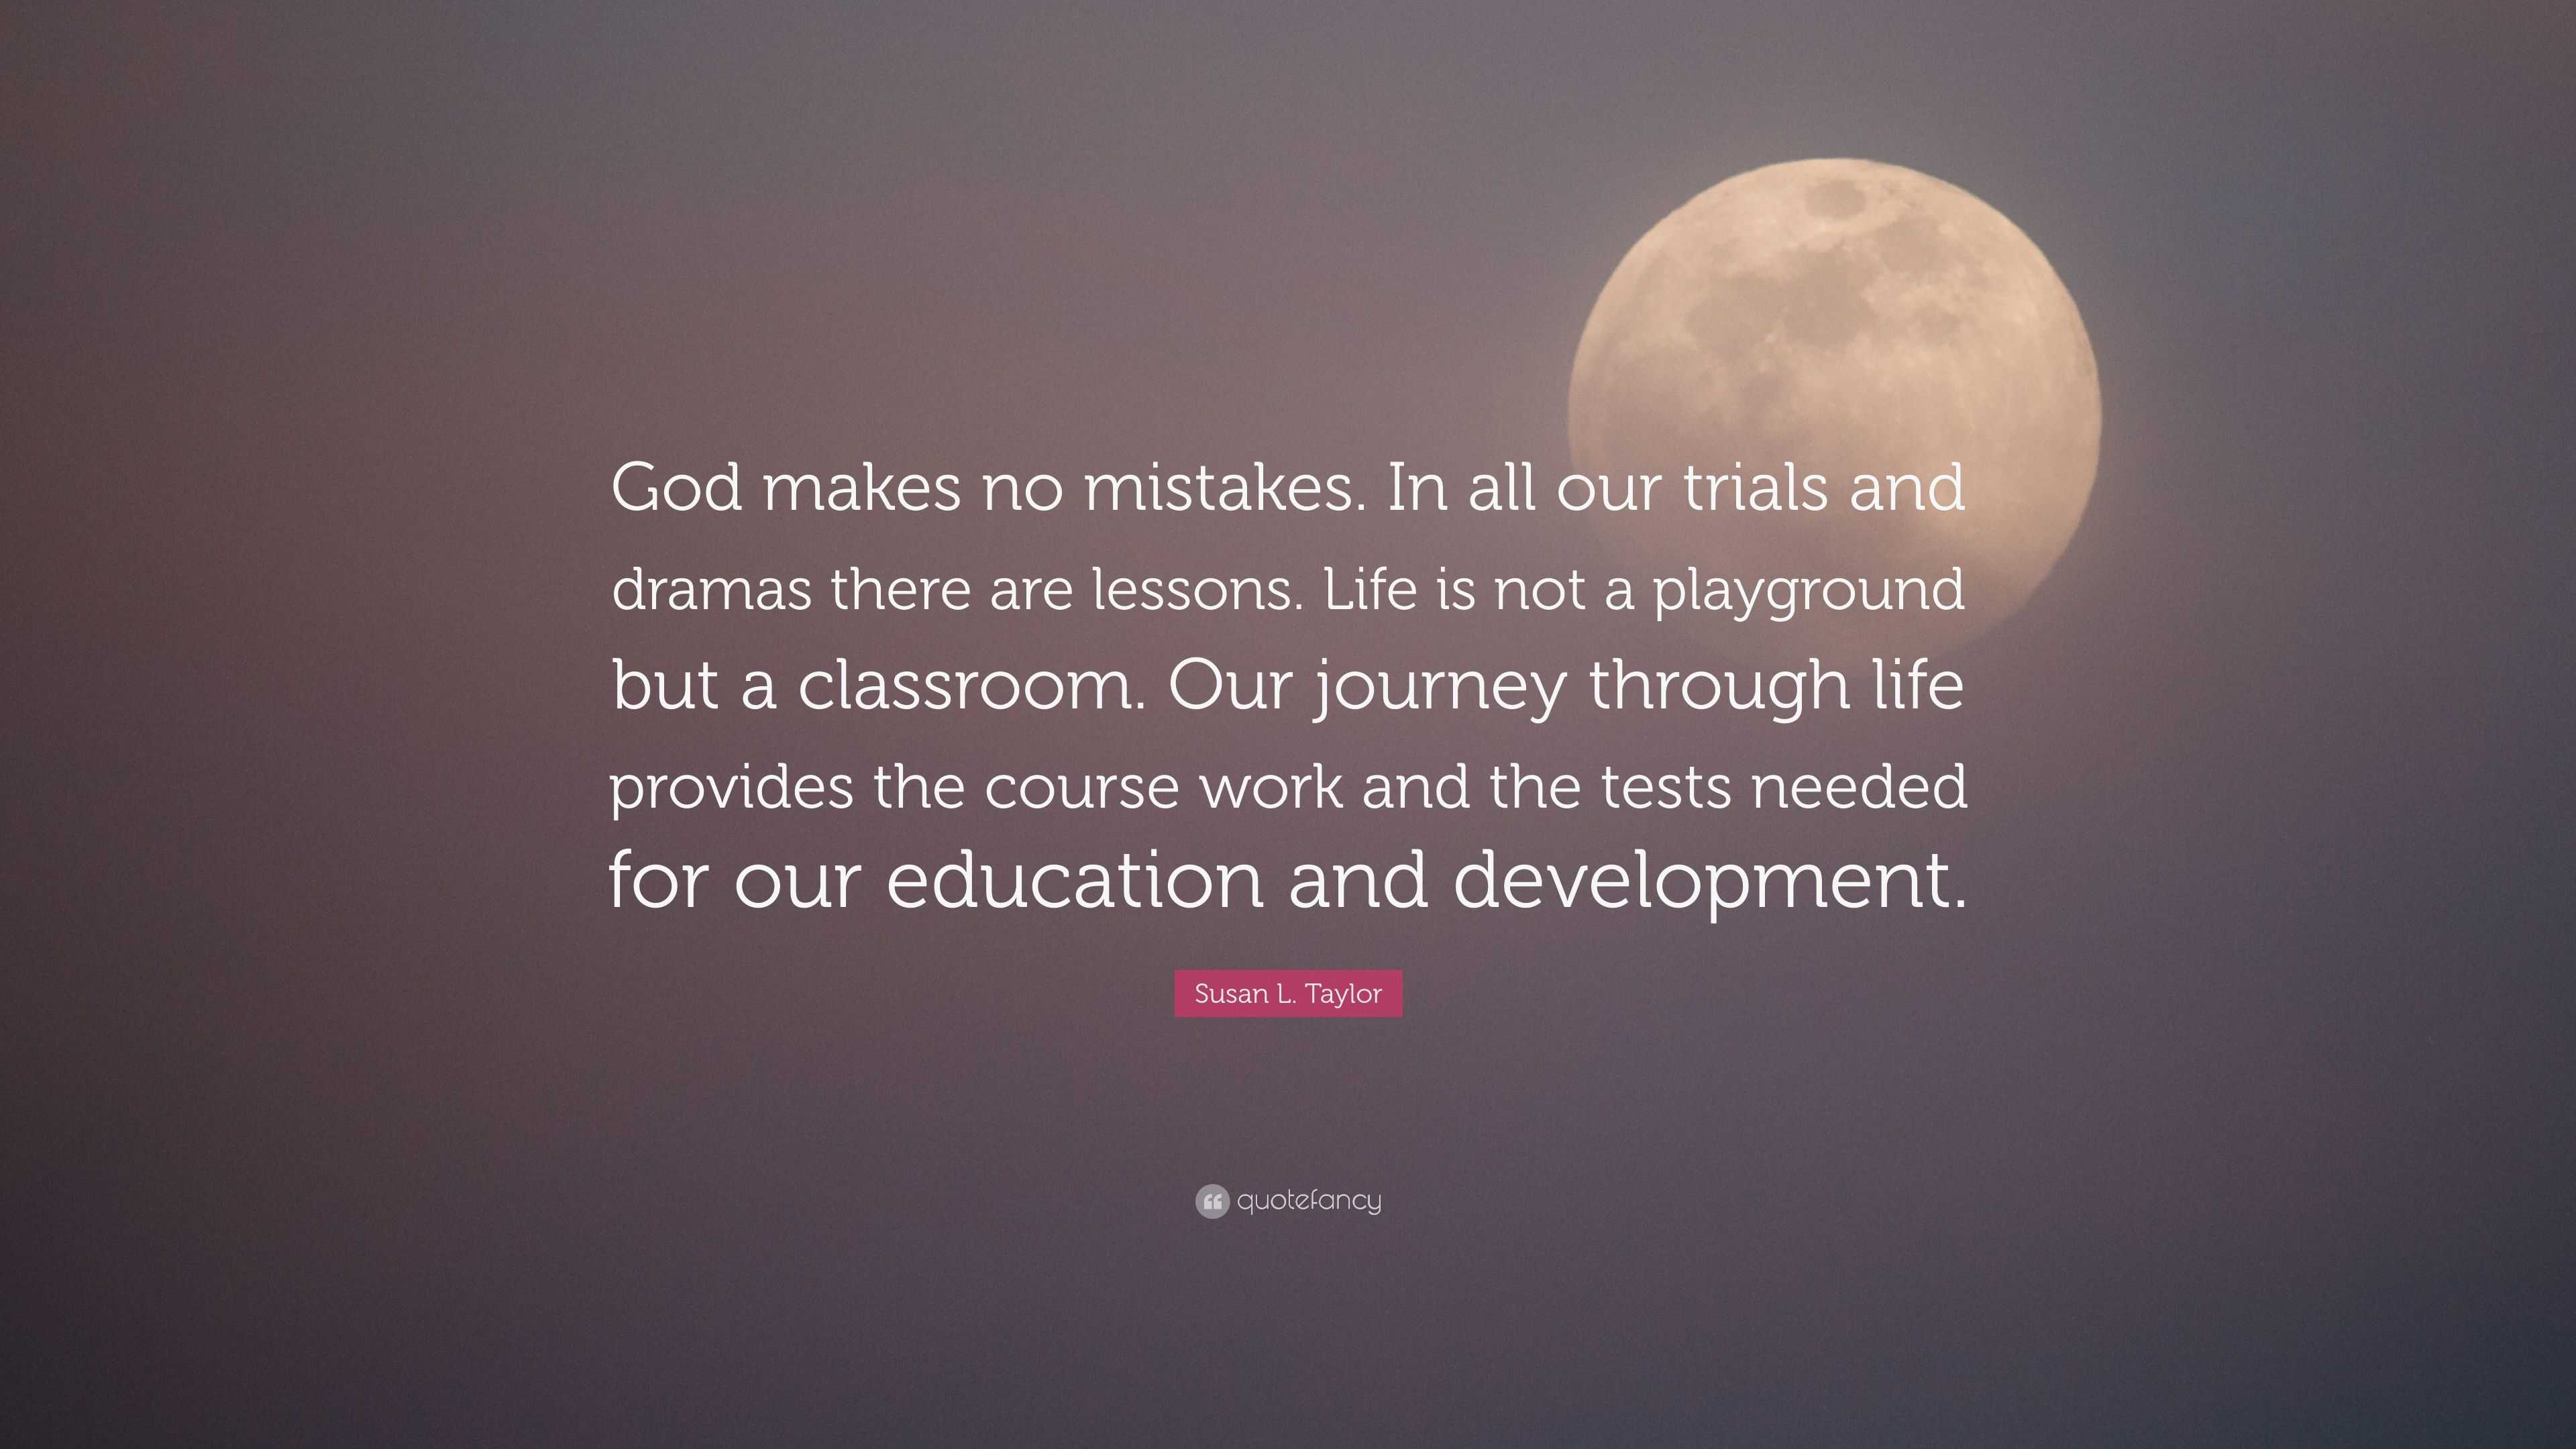 Susan L Taylor Quote “God makes no mistakes In all our trials